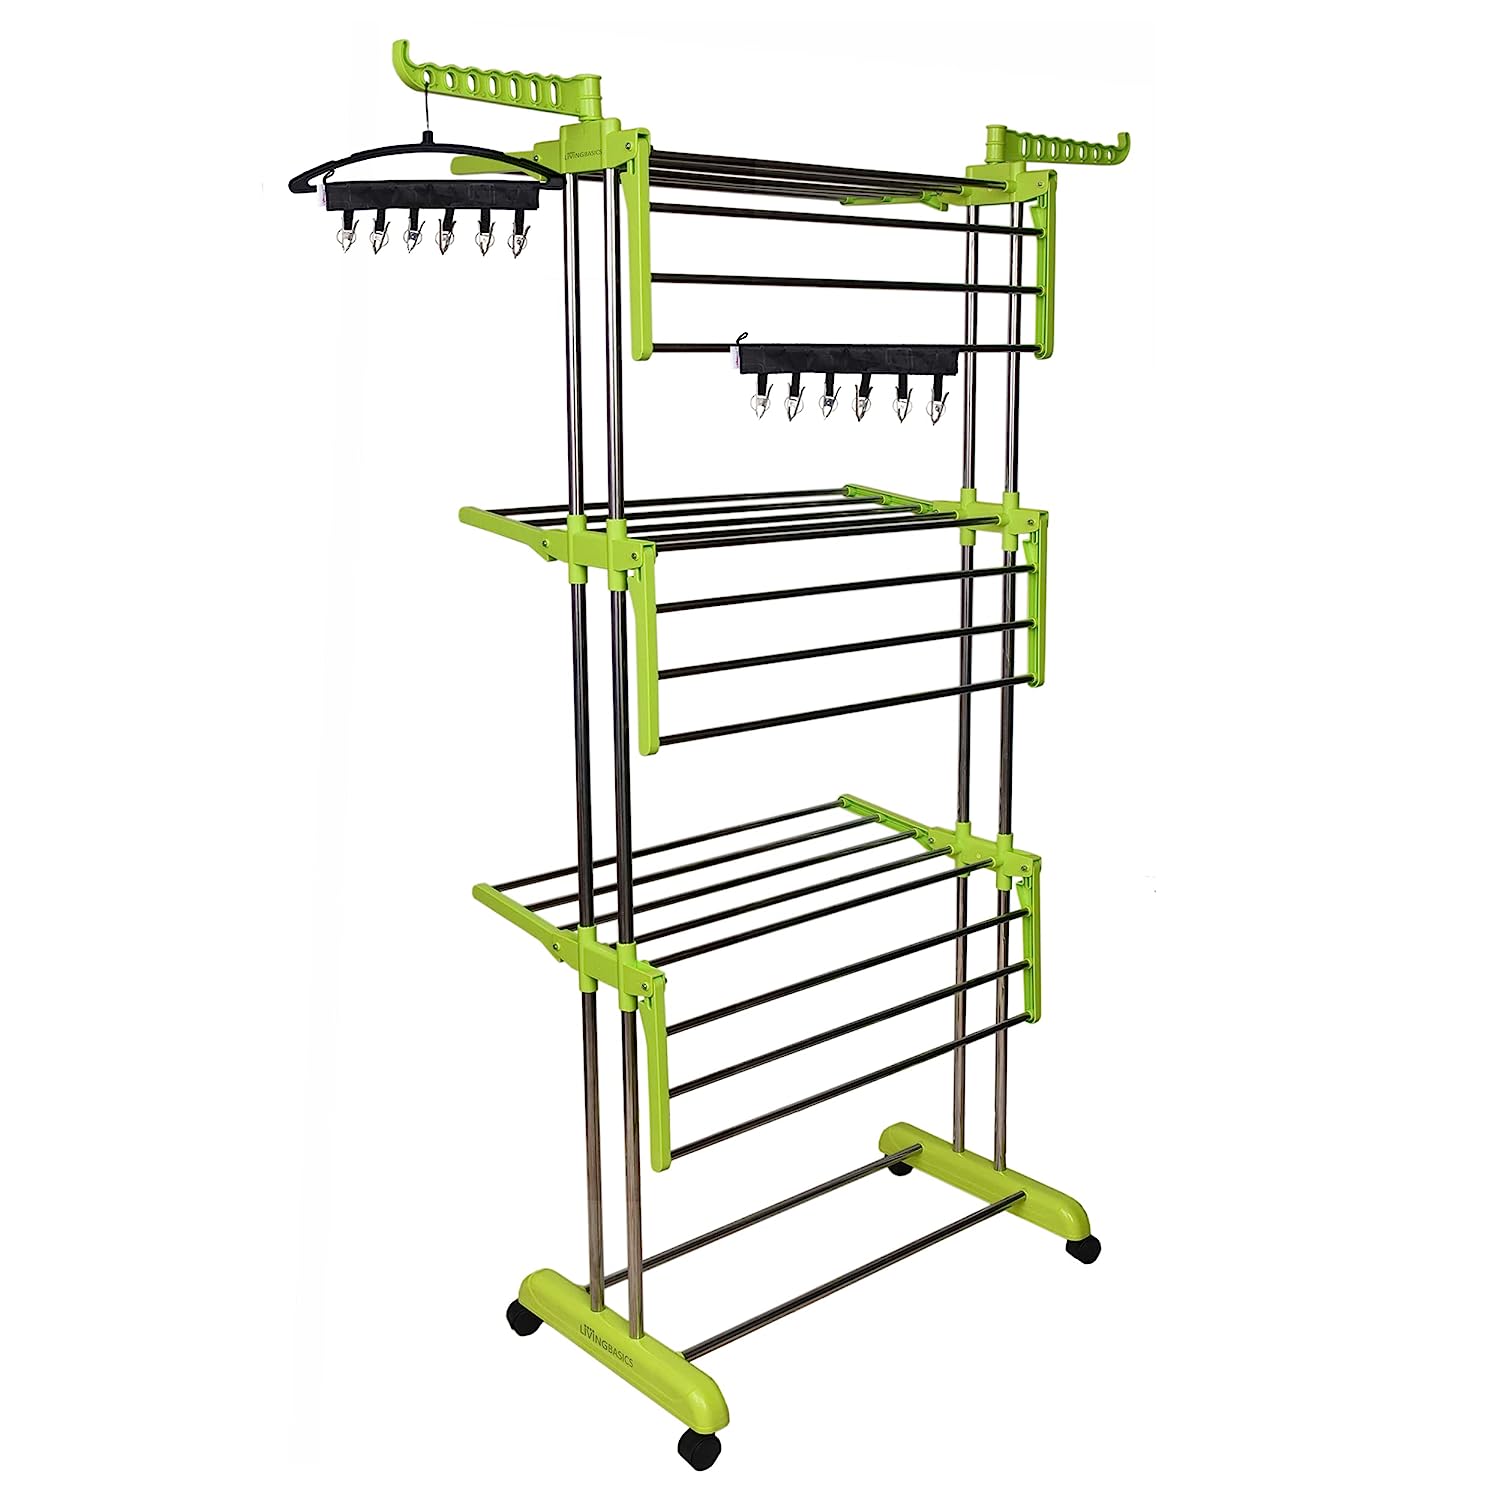 LivingBasics® Heavy Duty Rust-free Double Pole Clothes Drying Racks with Wheels for Indoor/Outdoor/Balcony (COMBO Products LIME  GREEN+ ICON CLOTH CLIP)(ABS PLASTIC)